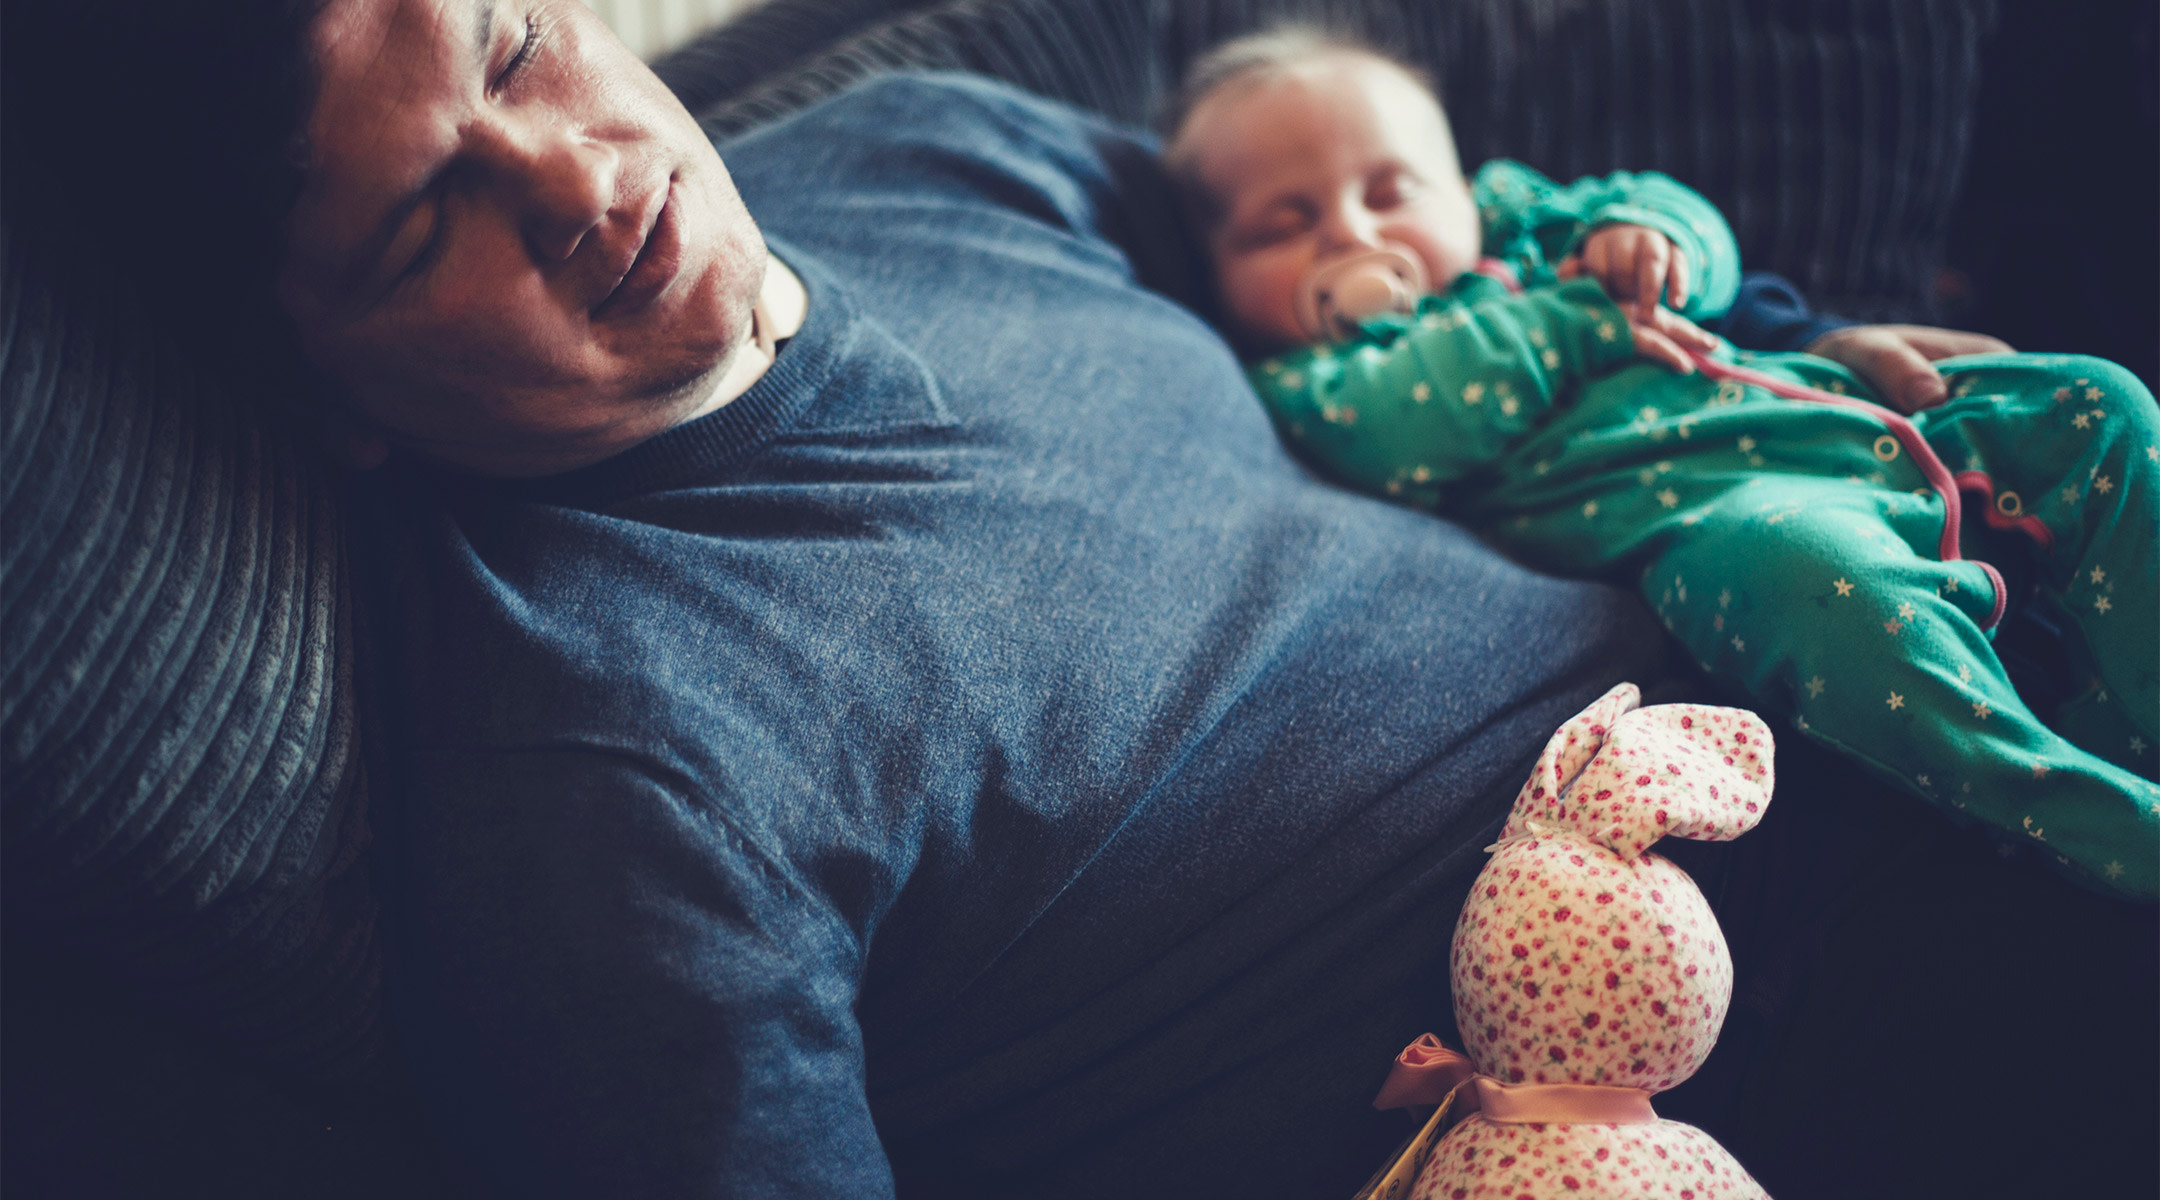 dad sleeping with baby on couch at home